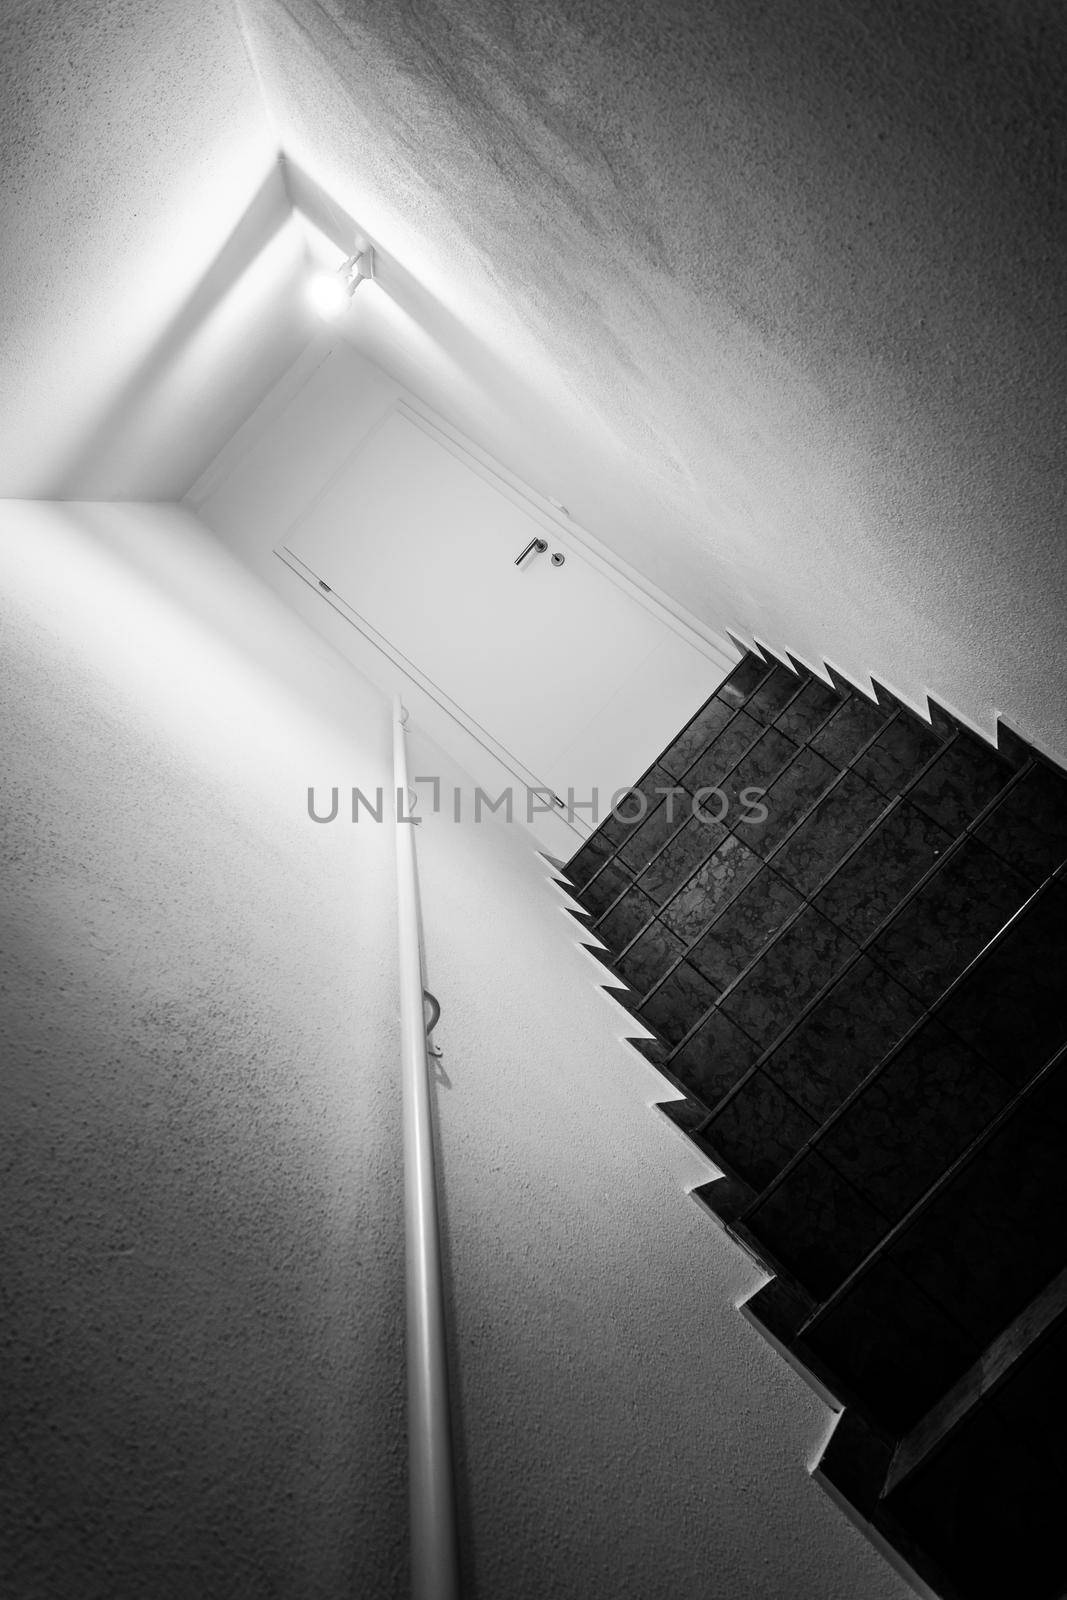 Basement stairs with balustrade, closed white door